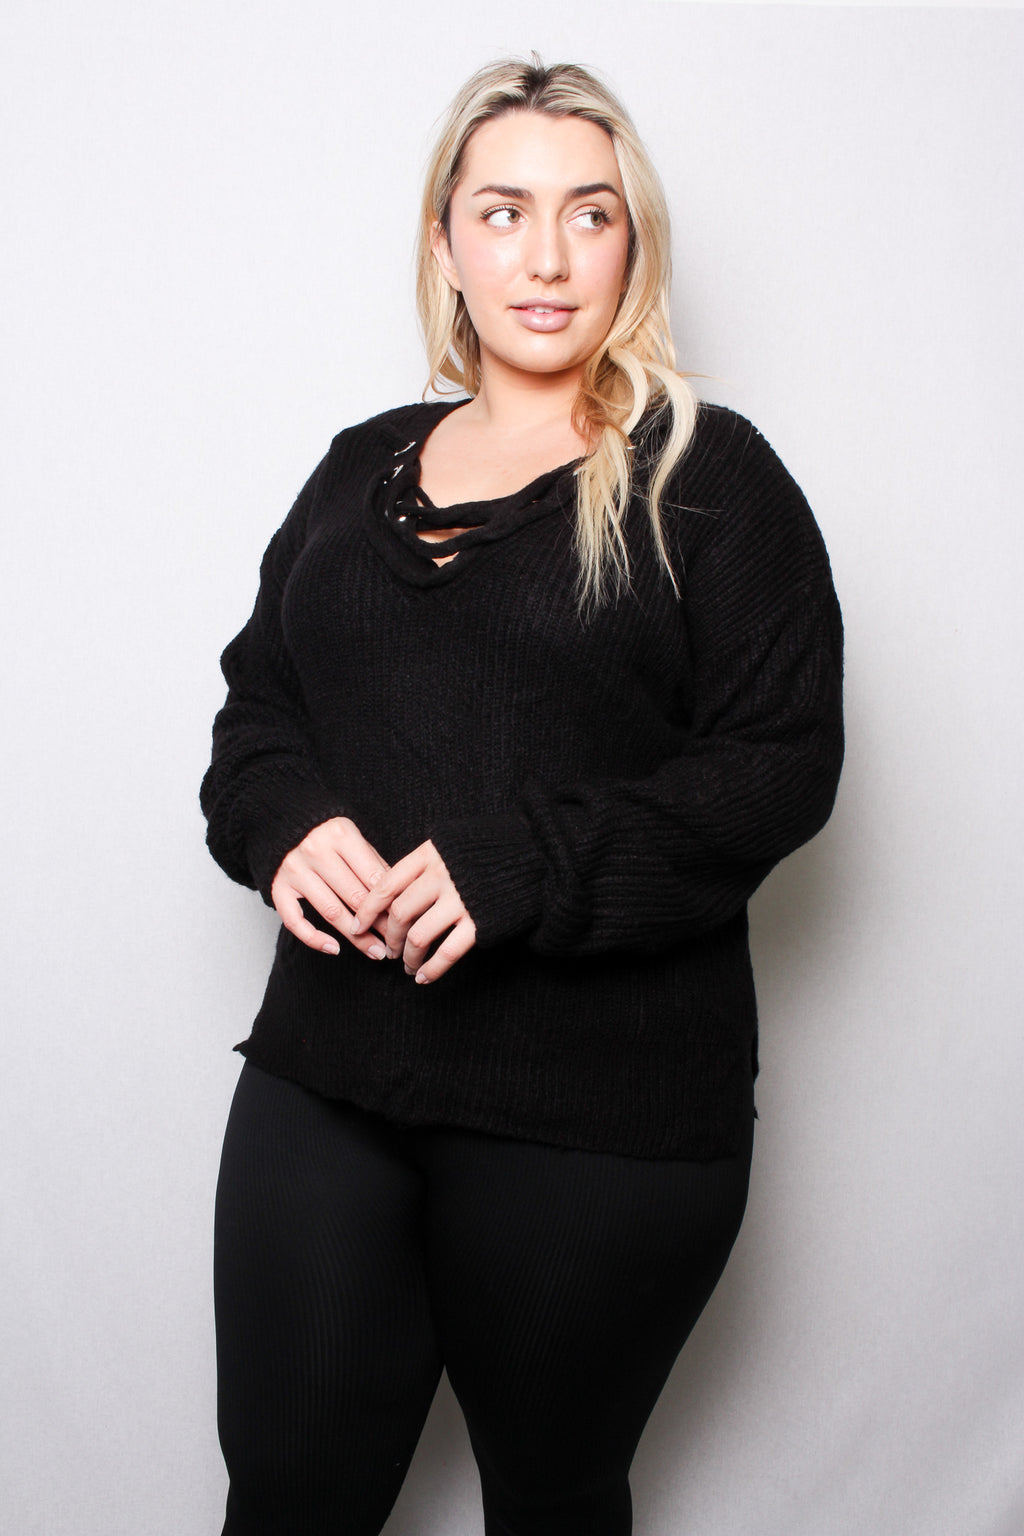 Plus Size Sweatshirts for Women,Sweater,bulk tshirts for printing  wholesale,womens plus size summer tops 2023 clearance,hot deals,1 dollar  items for